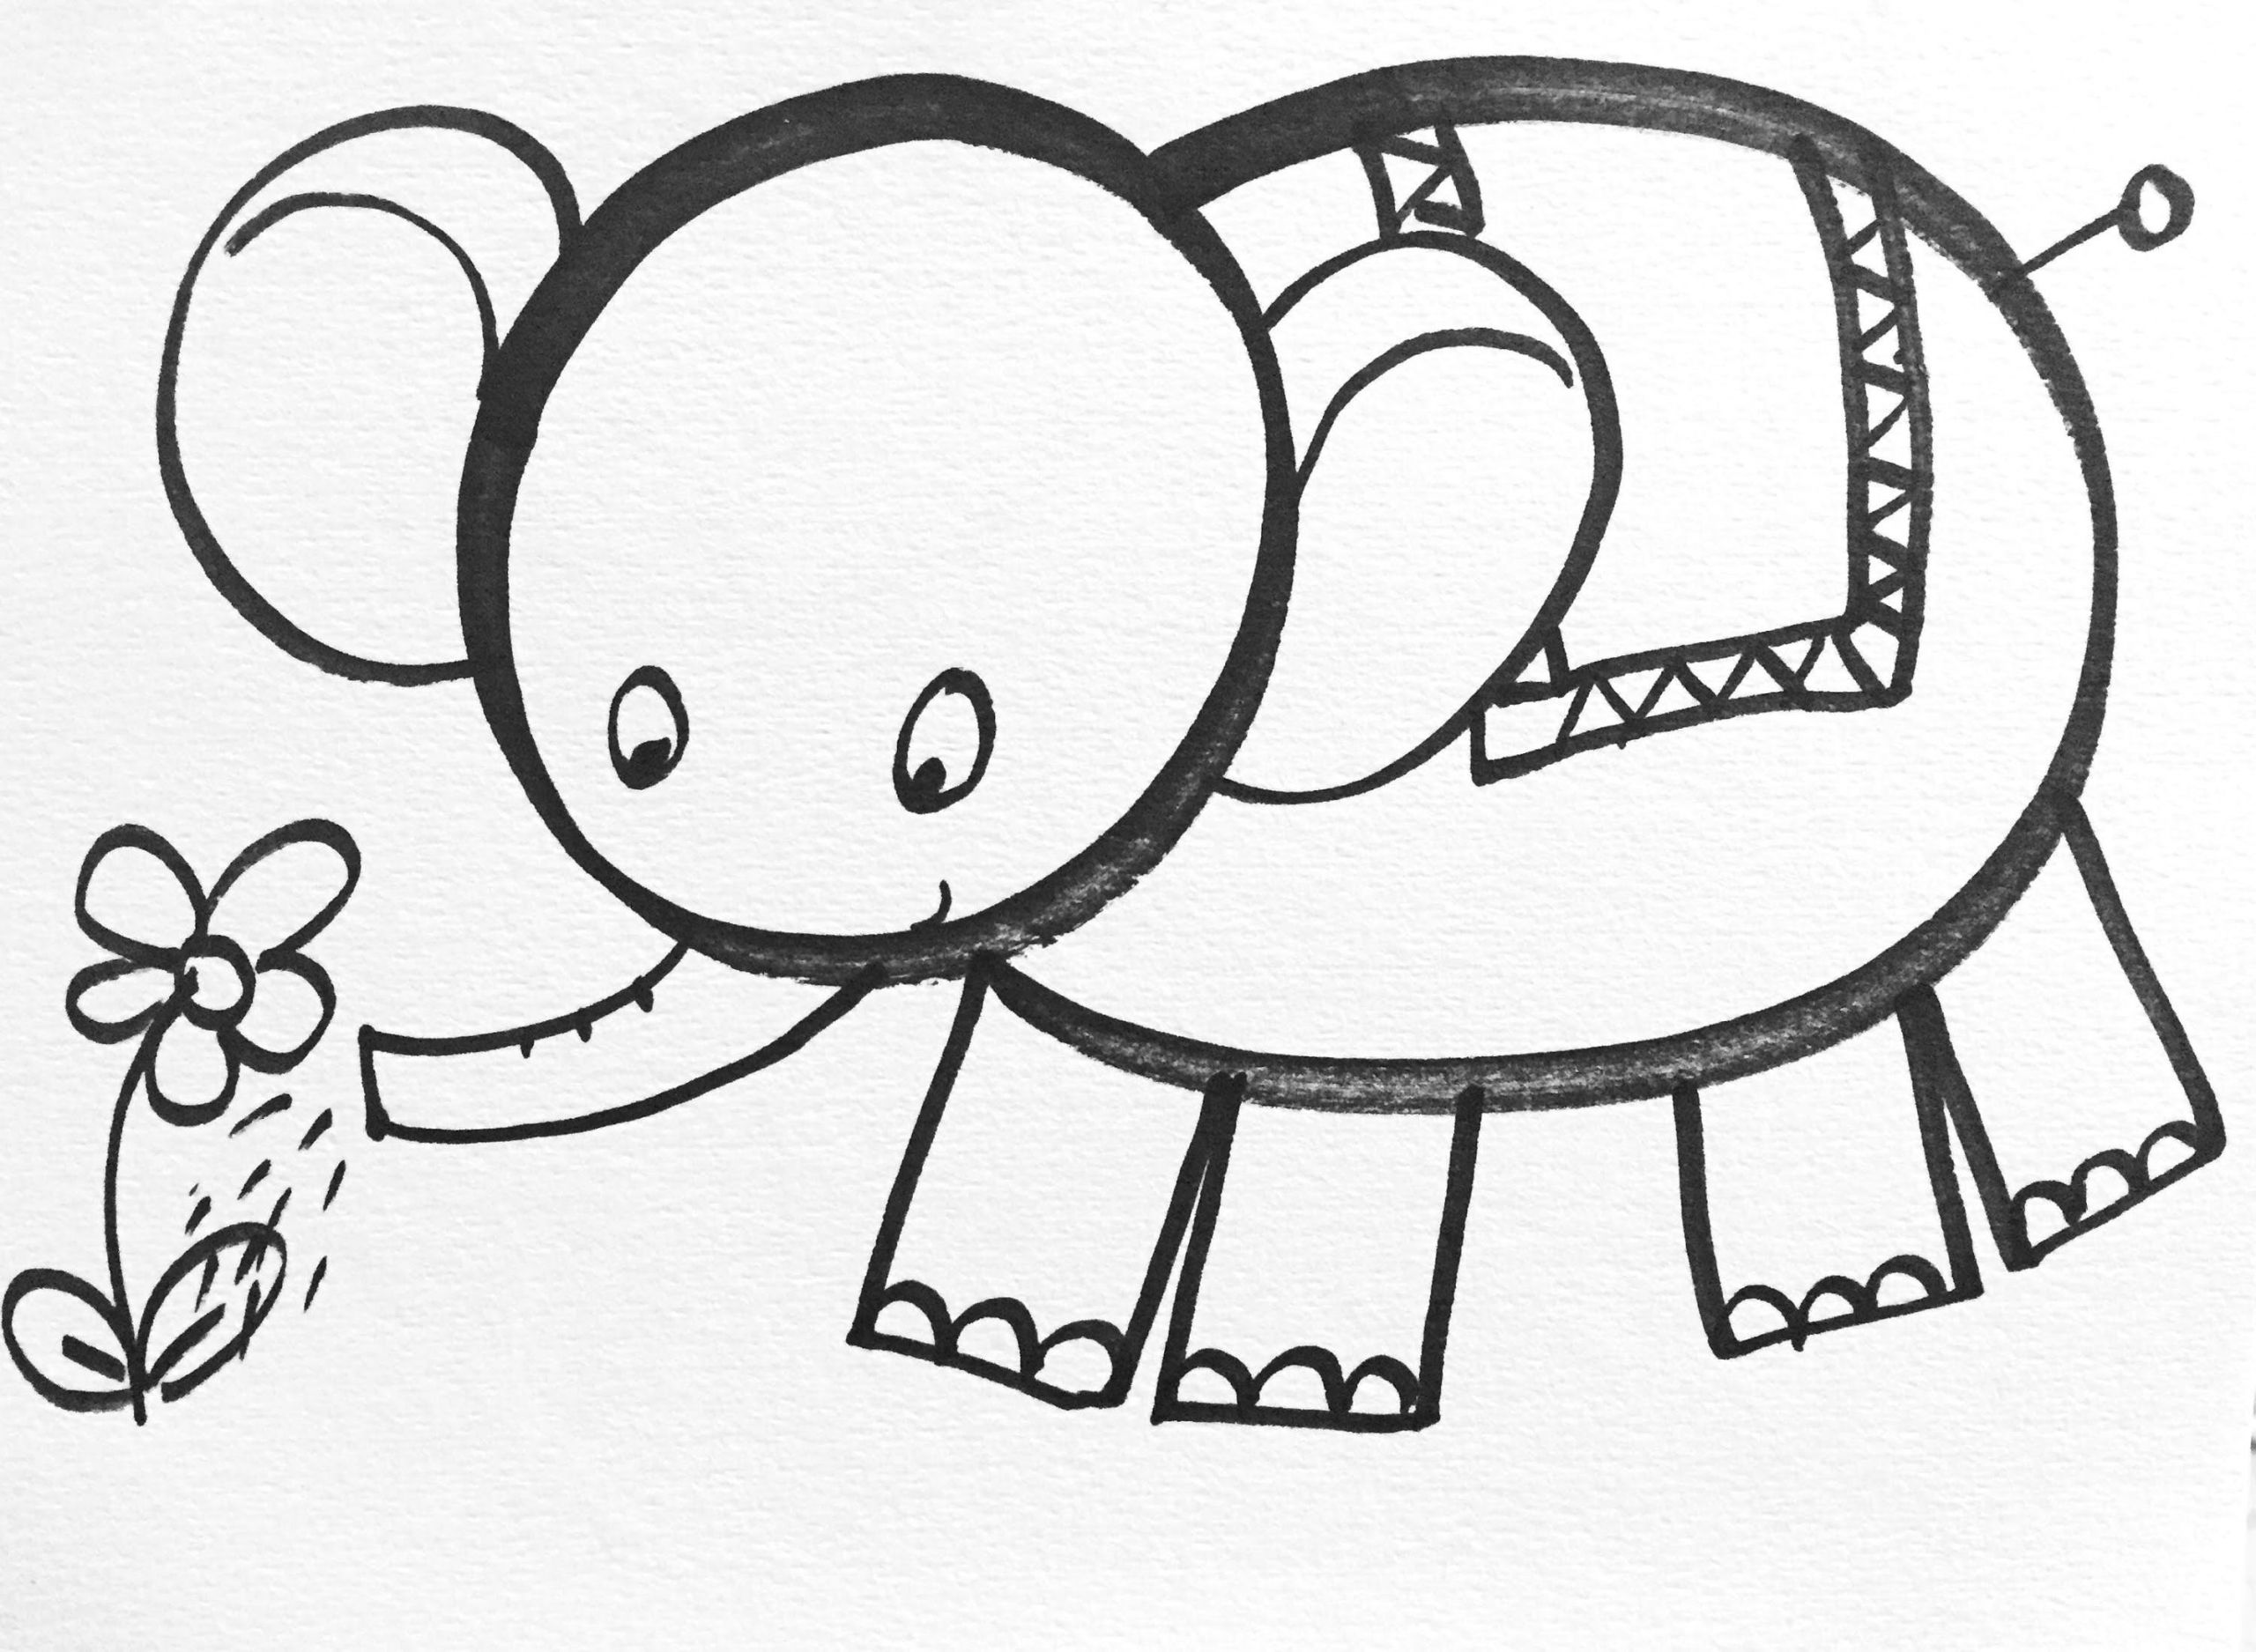 How to Draw An Easy Elephant Step by Step Learn How to Draw Easy In This Drawing You Can Learn to